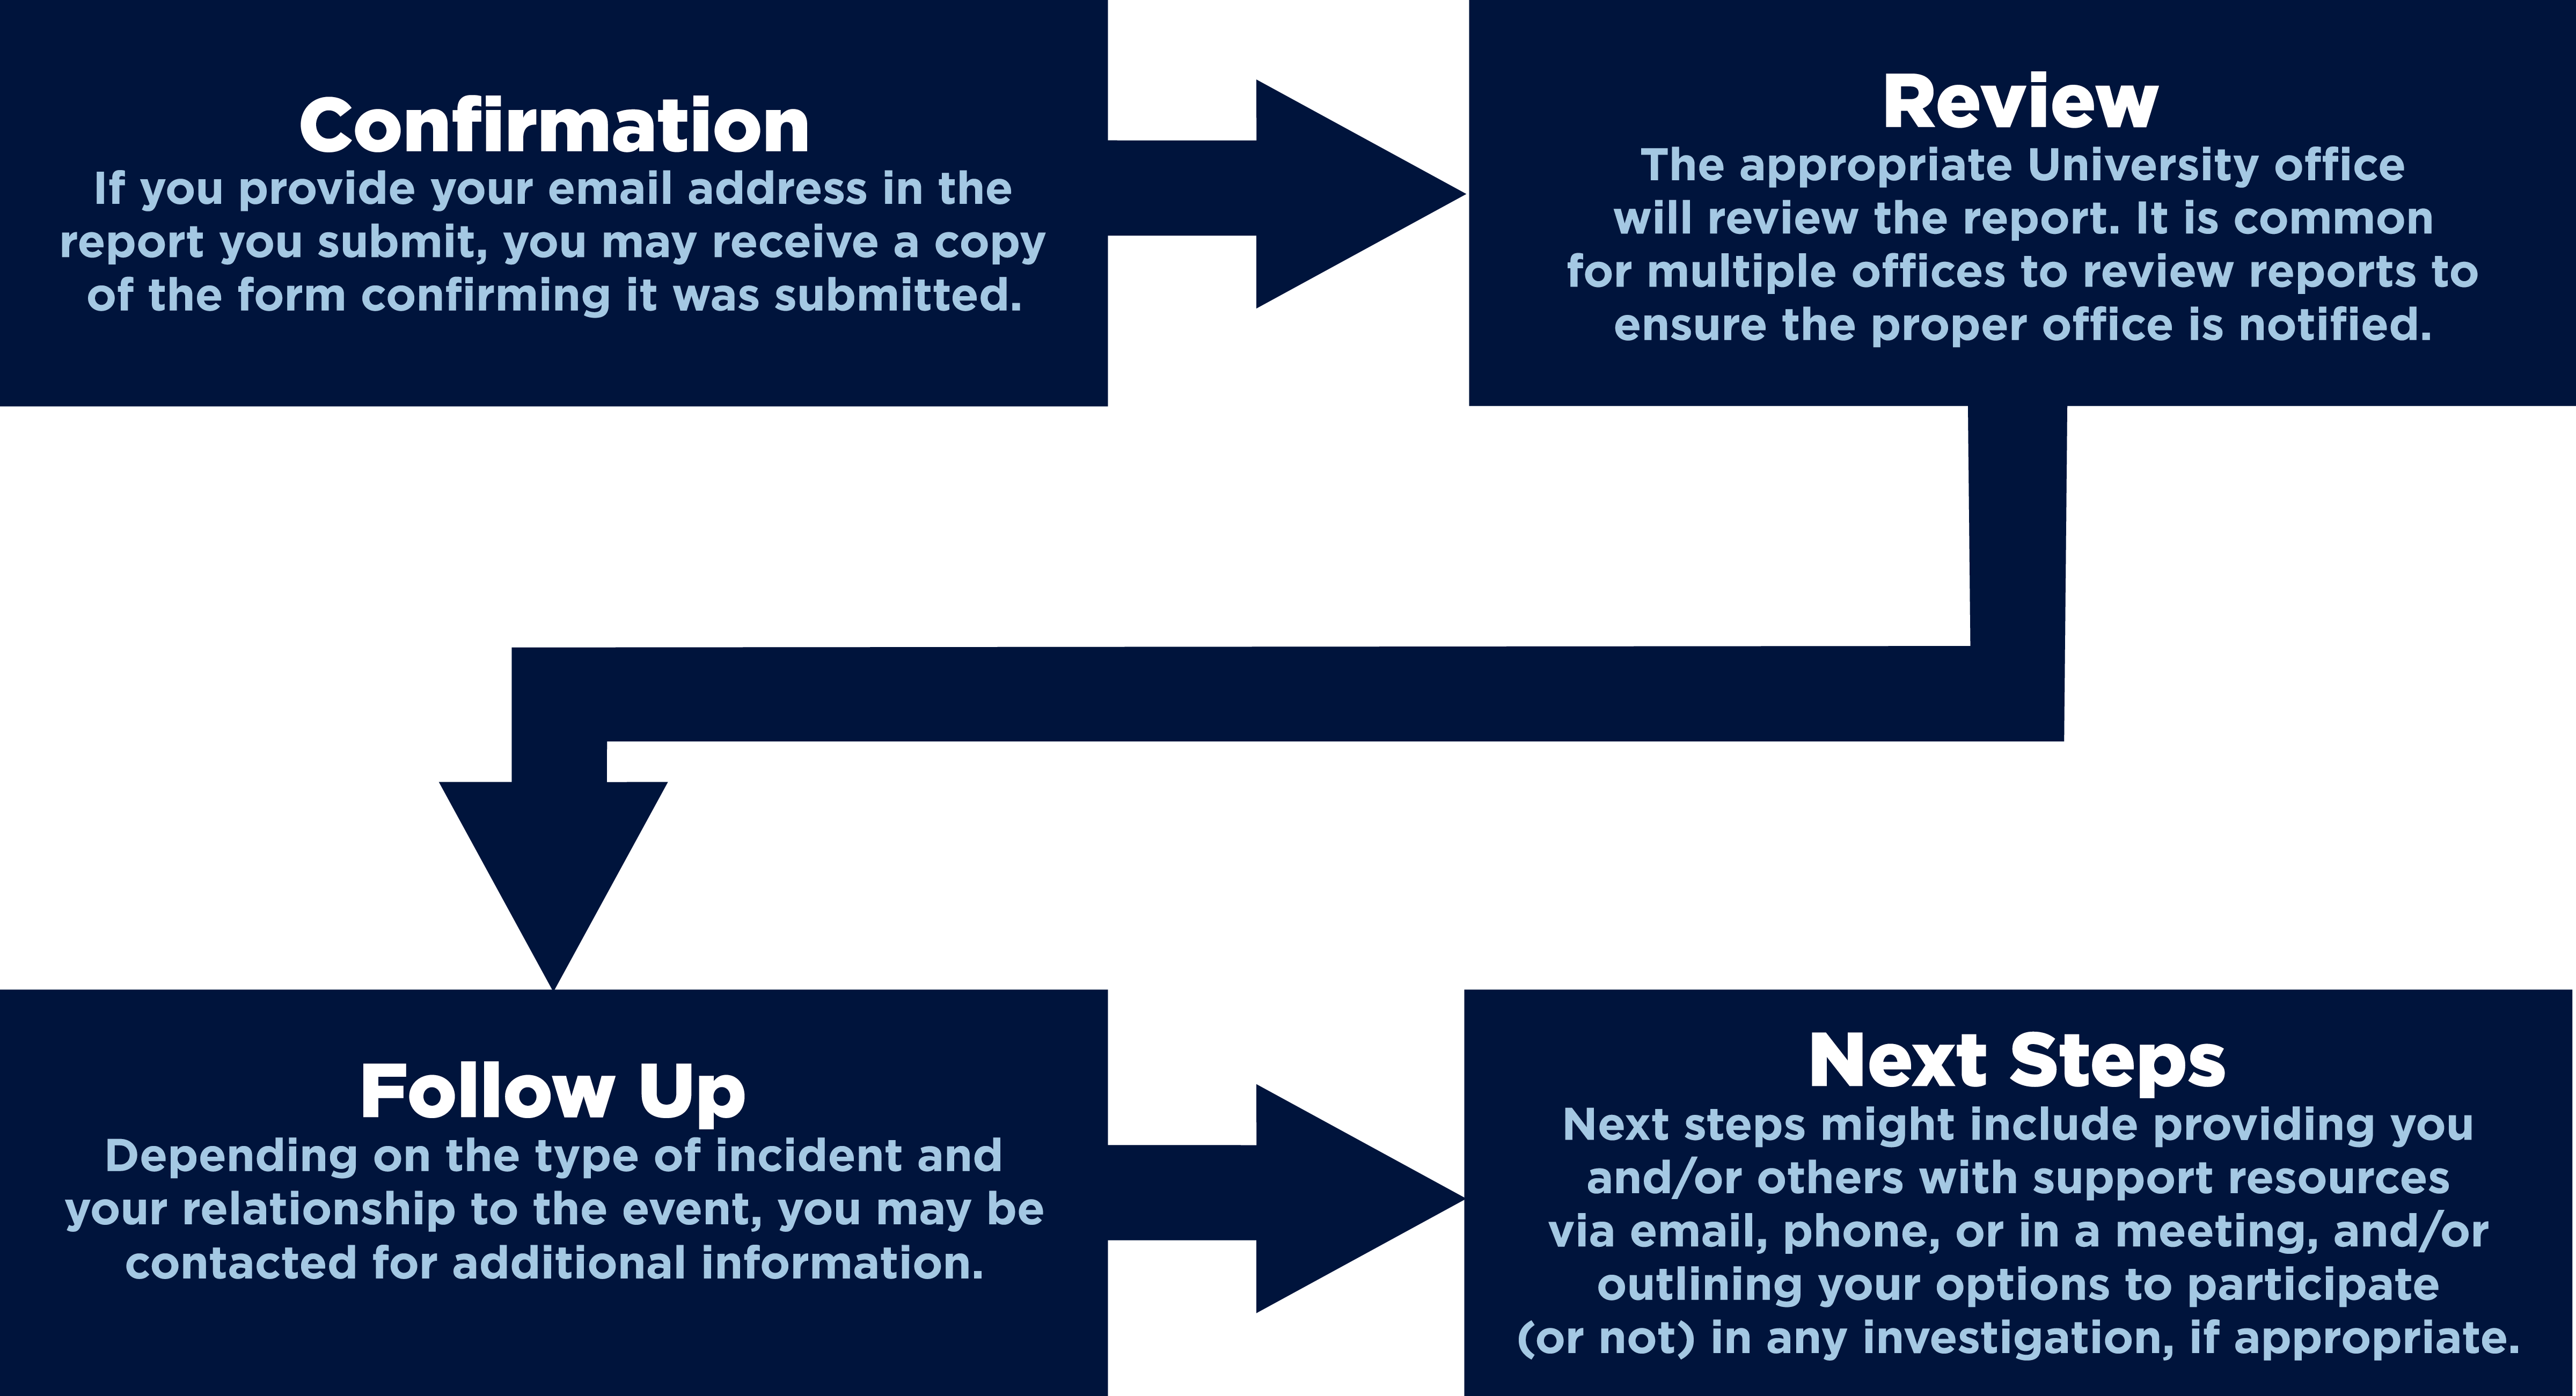 InForm Diagram about Confirmation, Review, Follow Up, and Next Steps